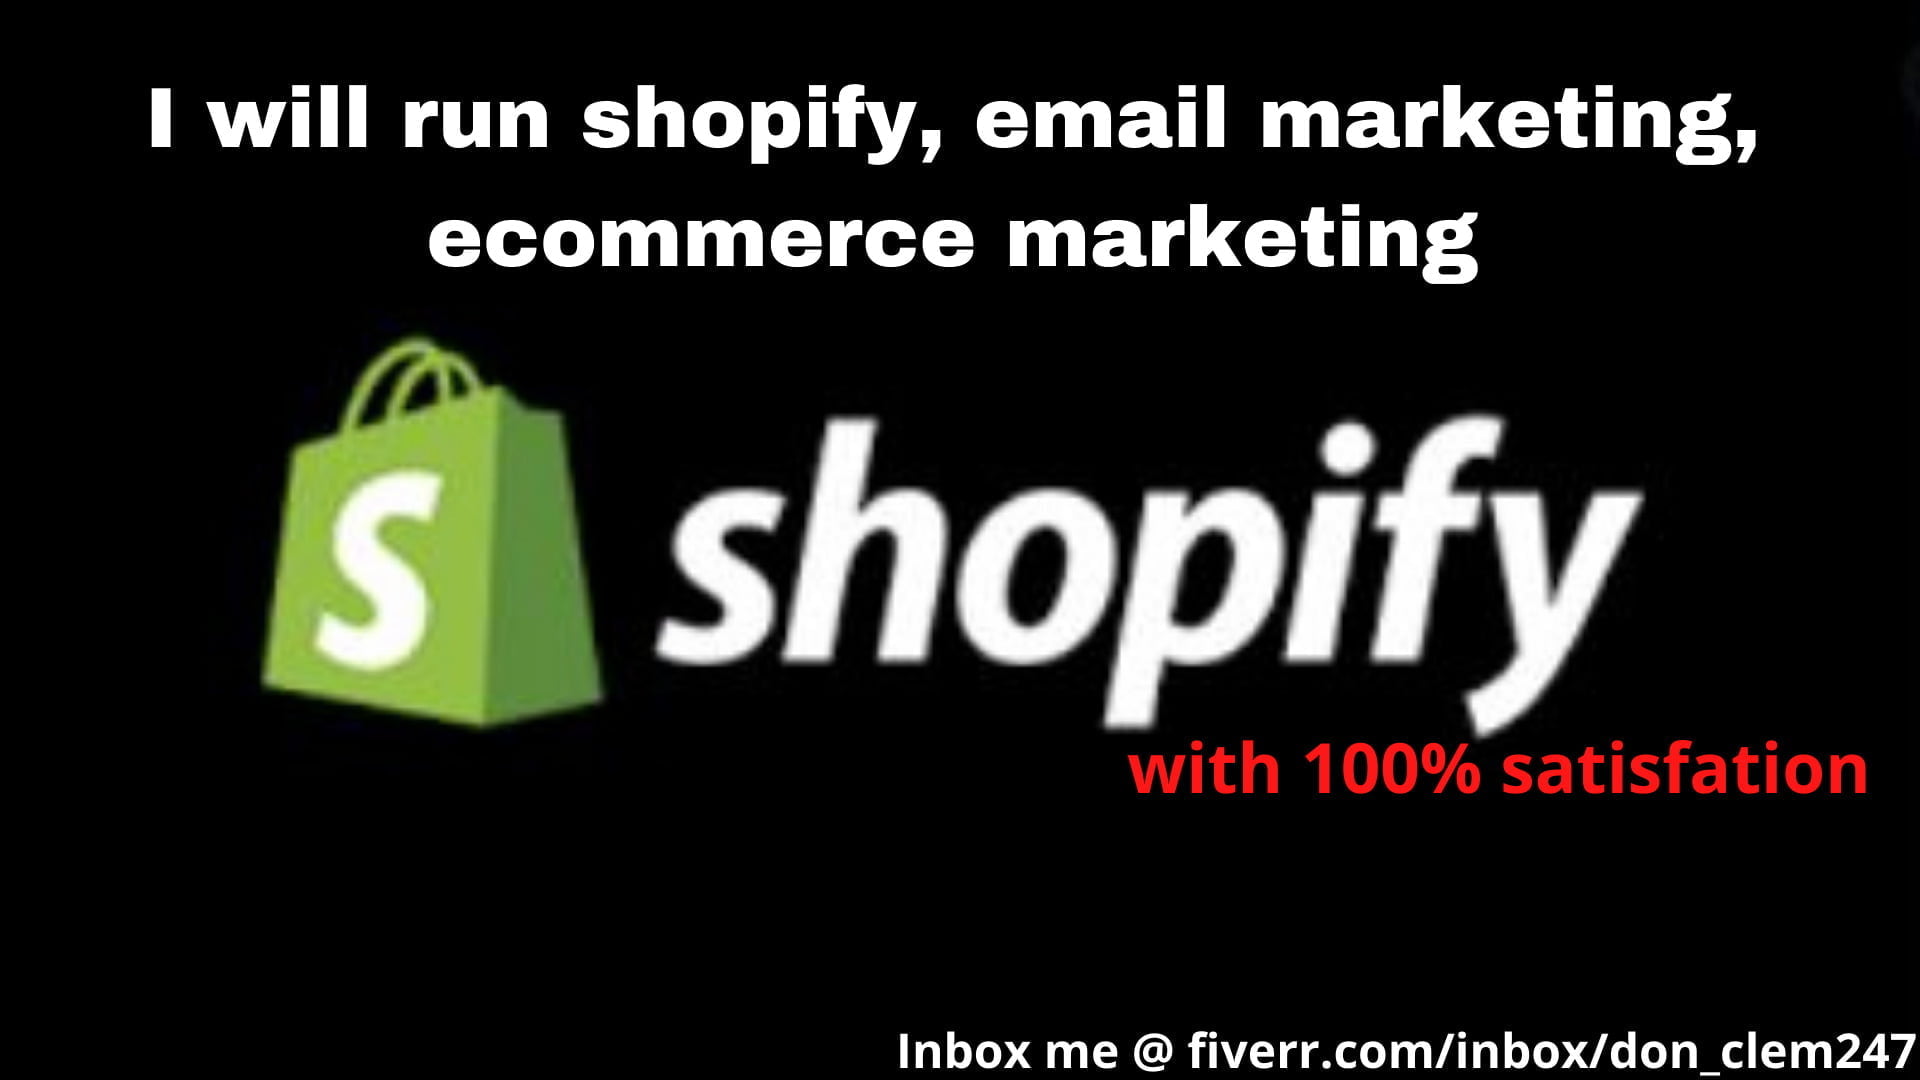 I will run shopify, email marketing, ecommerce marketing, FiverrBox